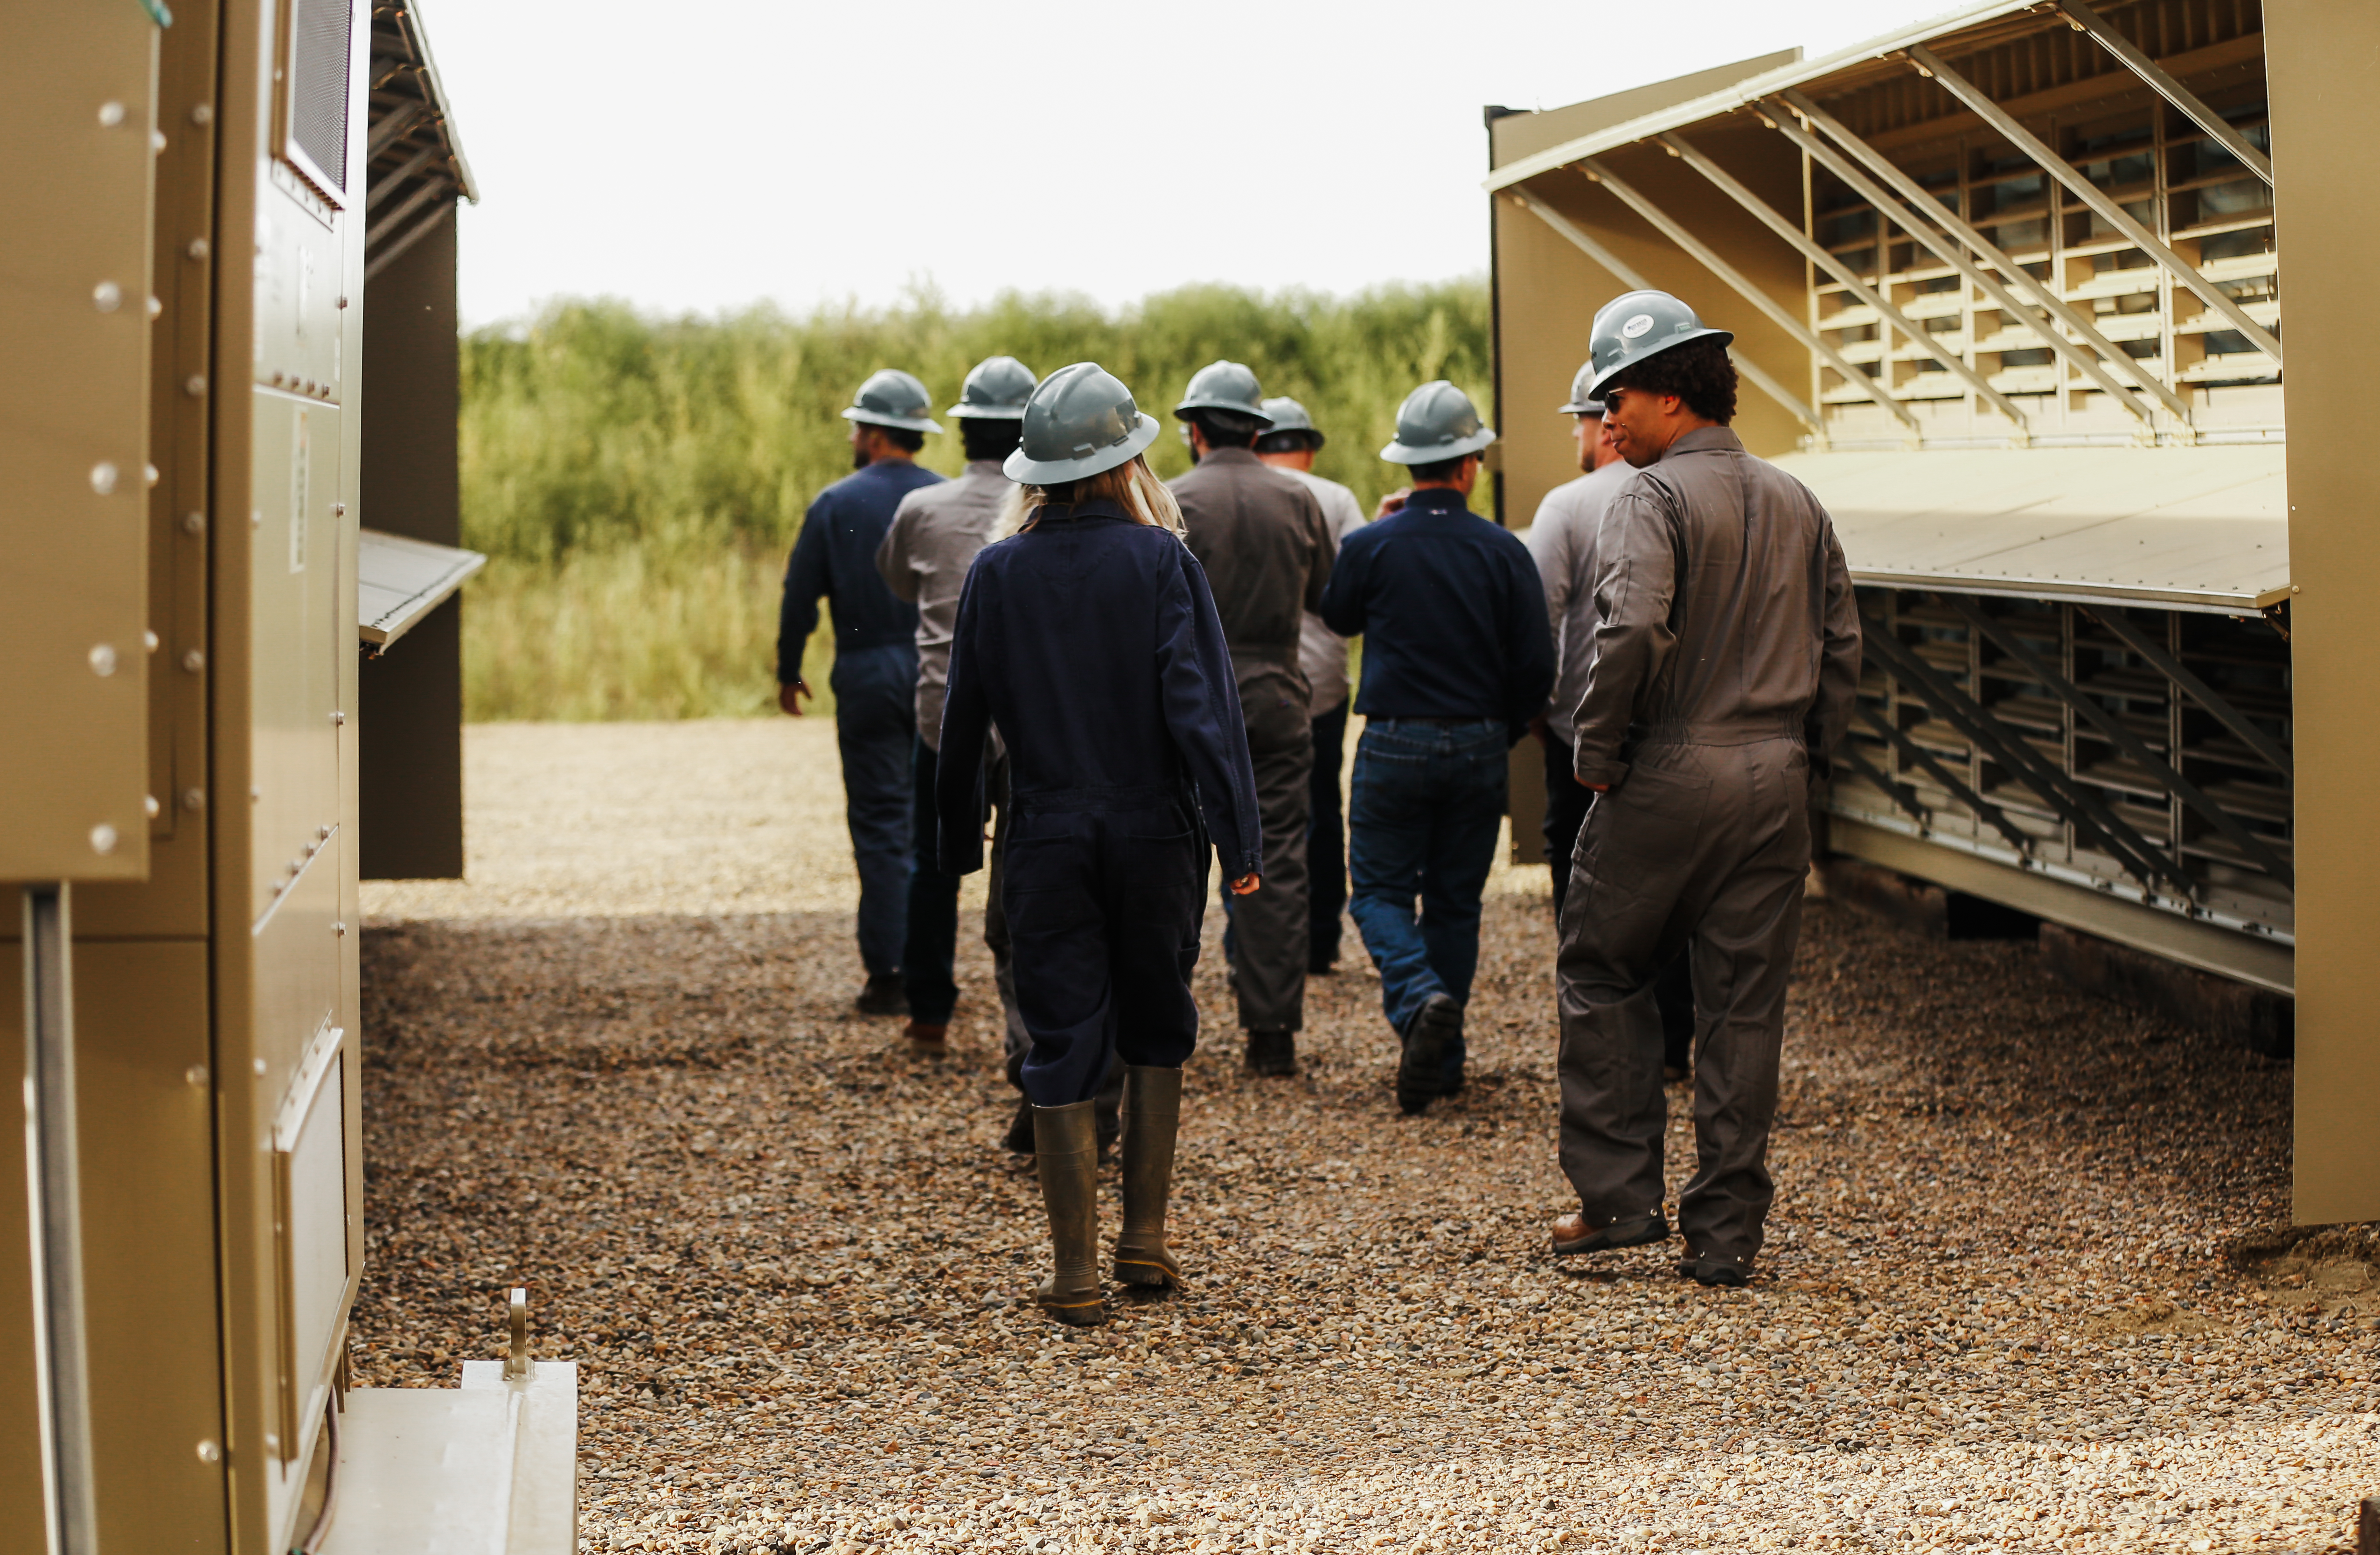 Crusoe Energy Systems staff walking through an outdoor facility 